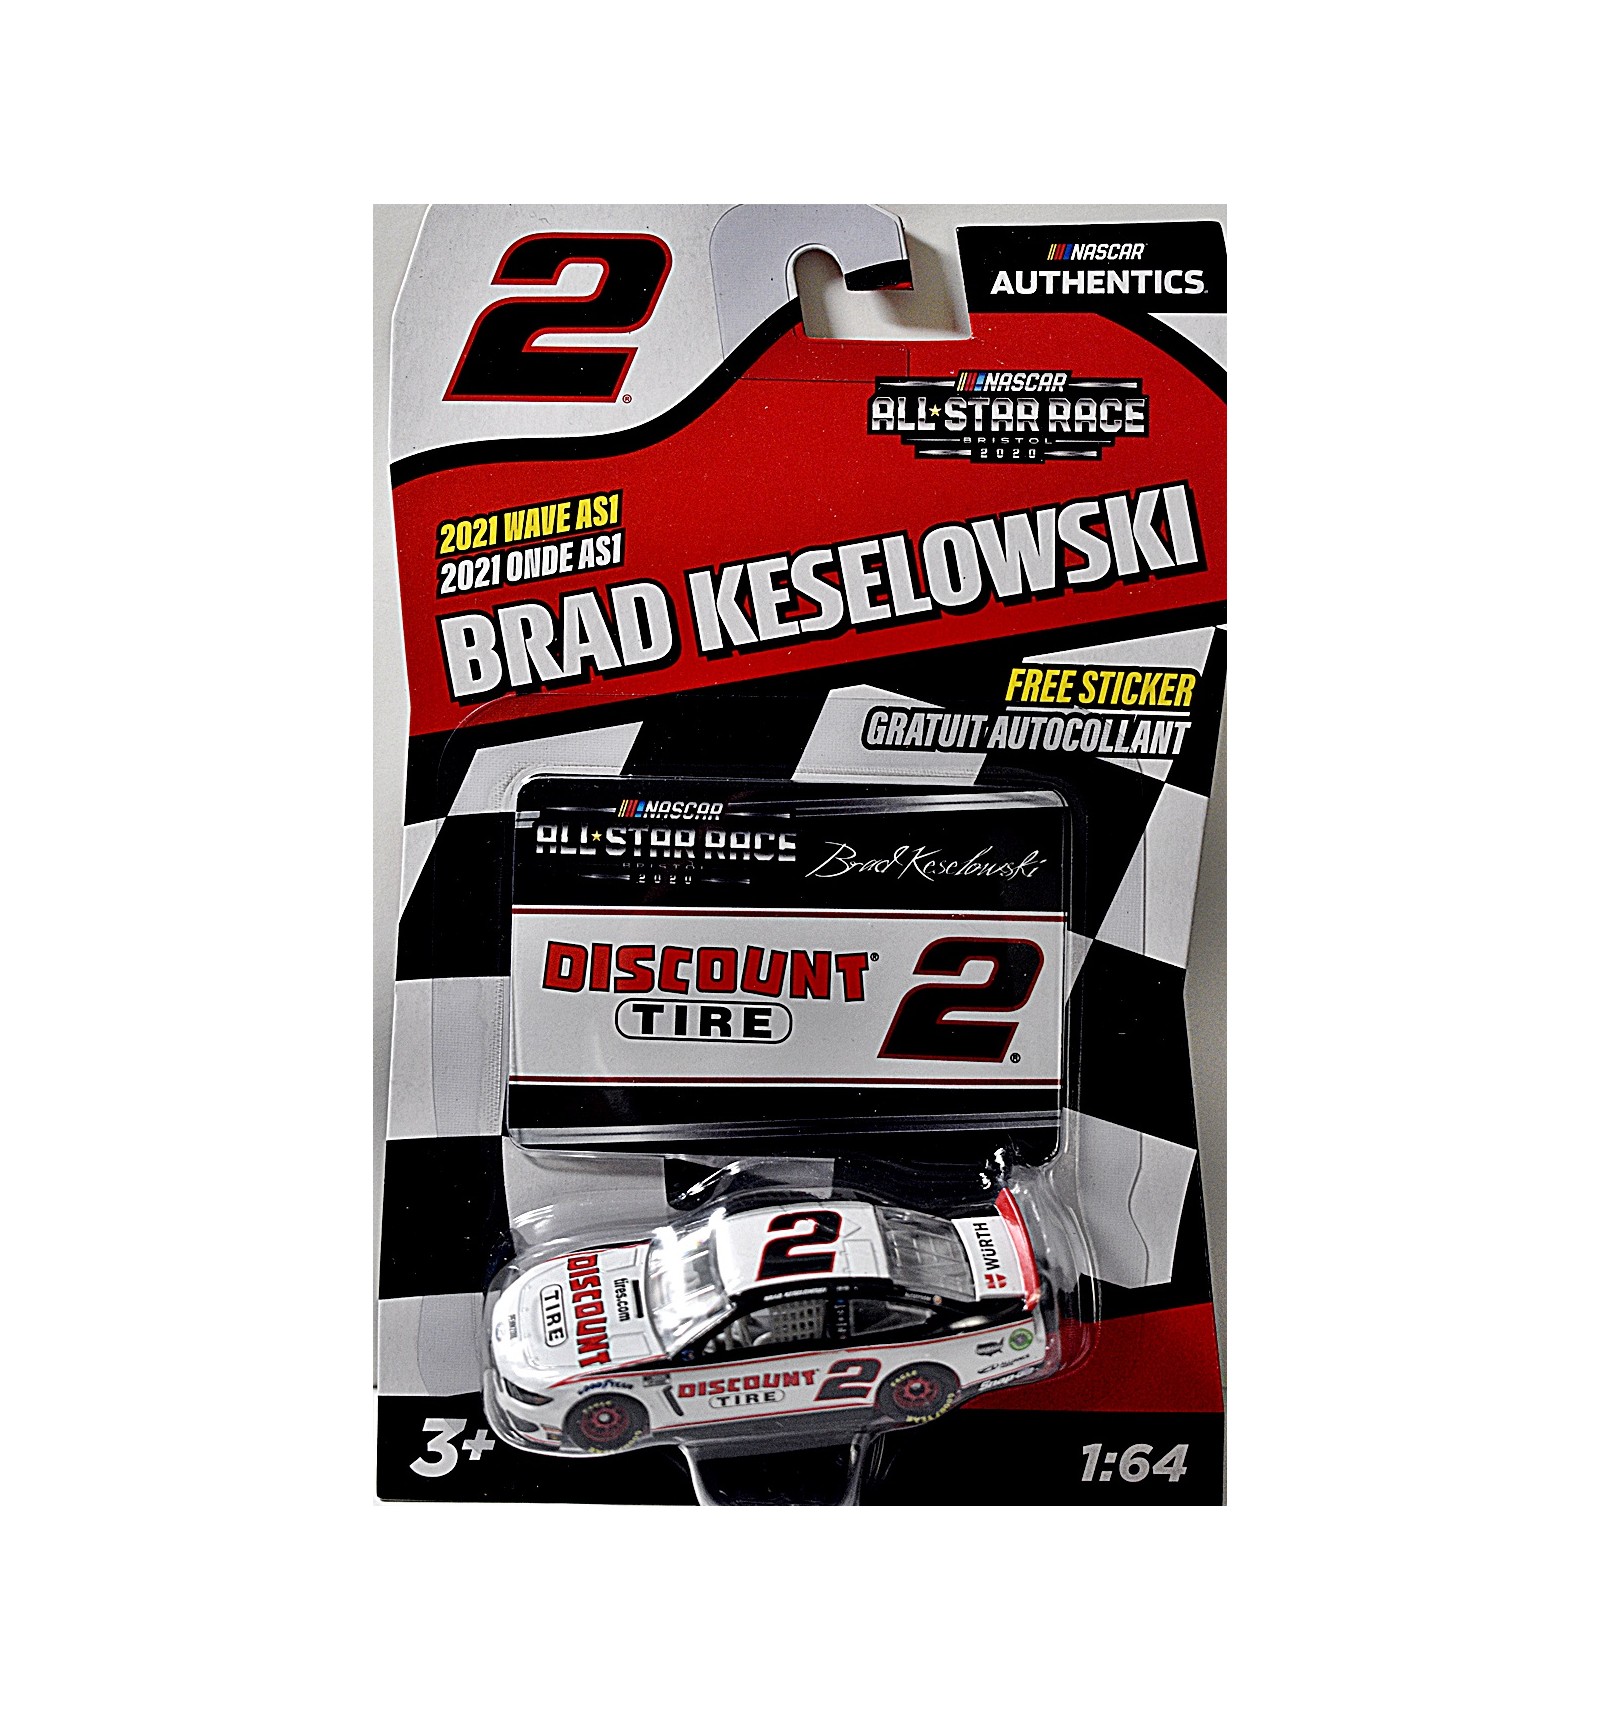 Brad Keselowski 2017 Lionel #22 Discount Tires Ford Mustang 1/64 Diecast FREE 